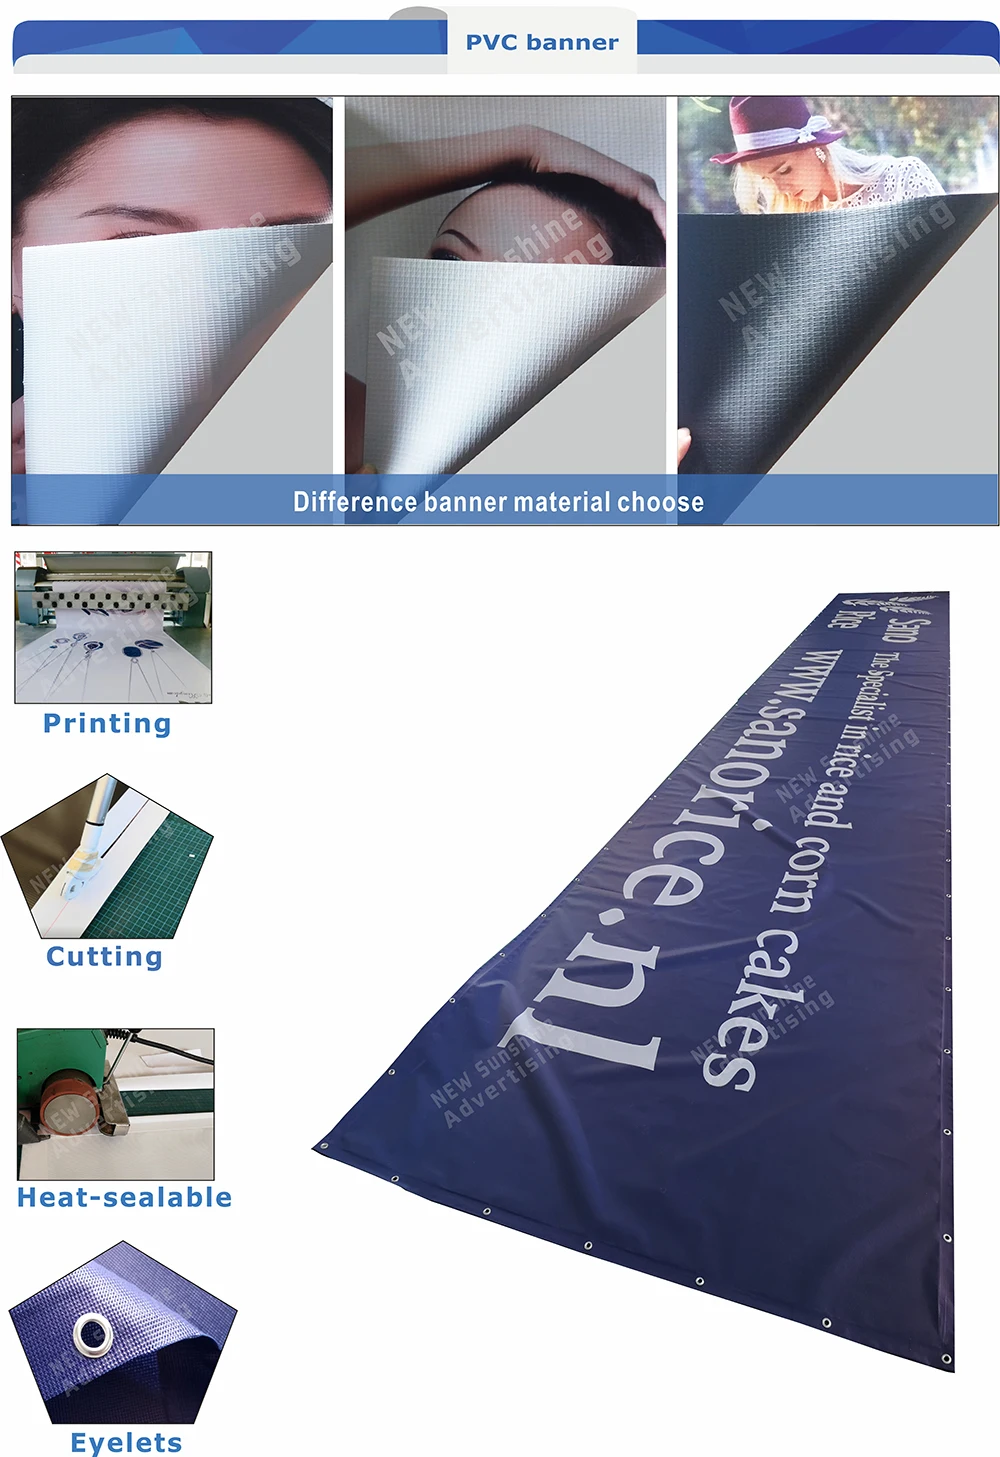 Details about   PVC BANNERS PRINTED OUTDOOR SIGN VINYL BANNERS 